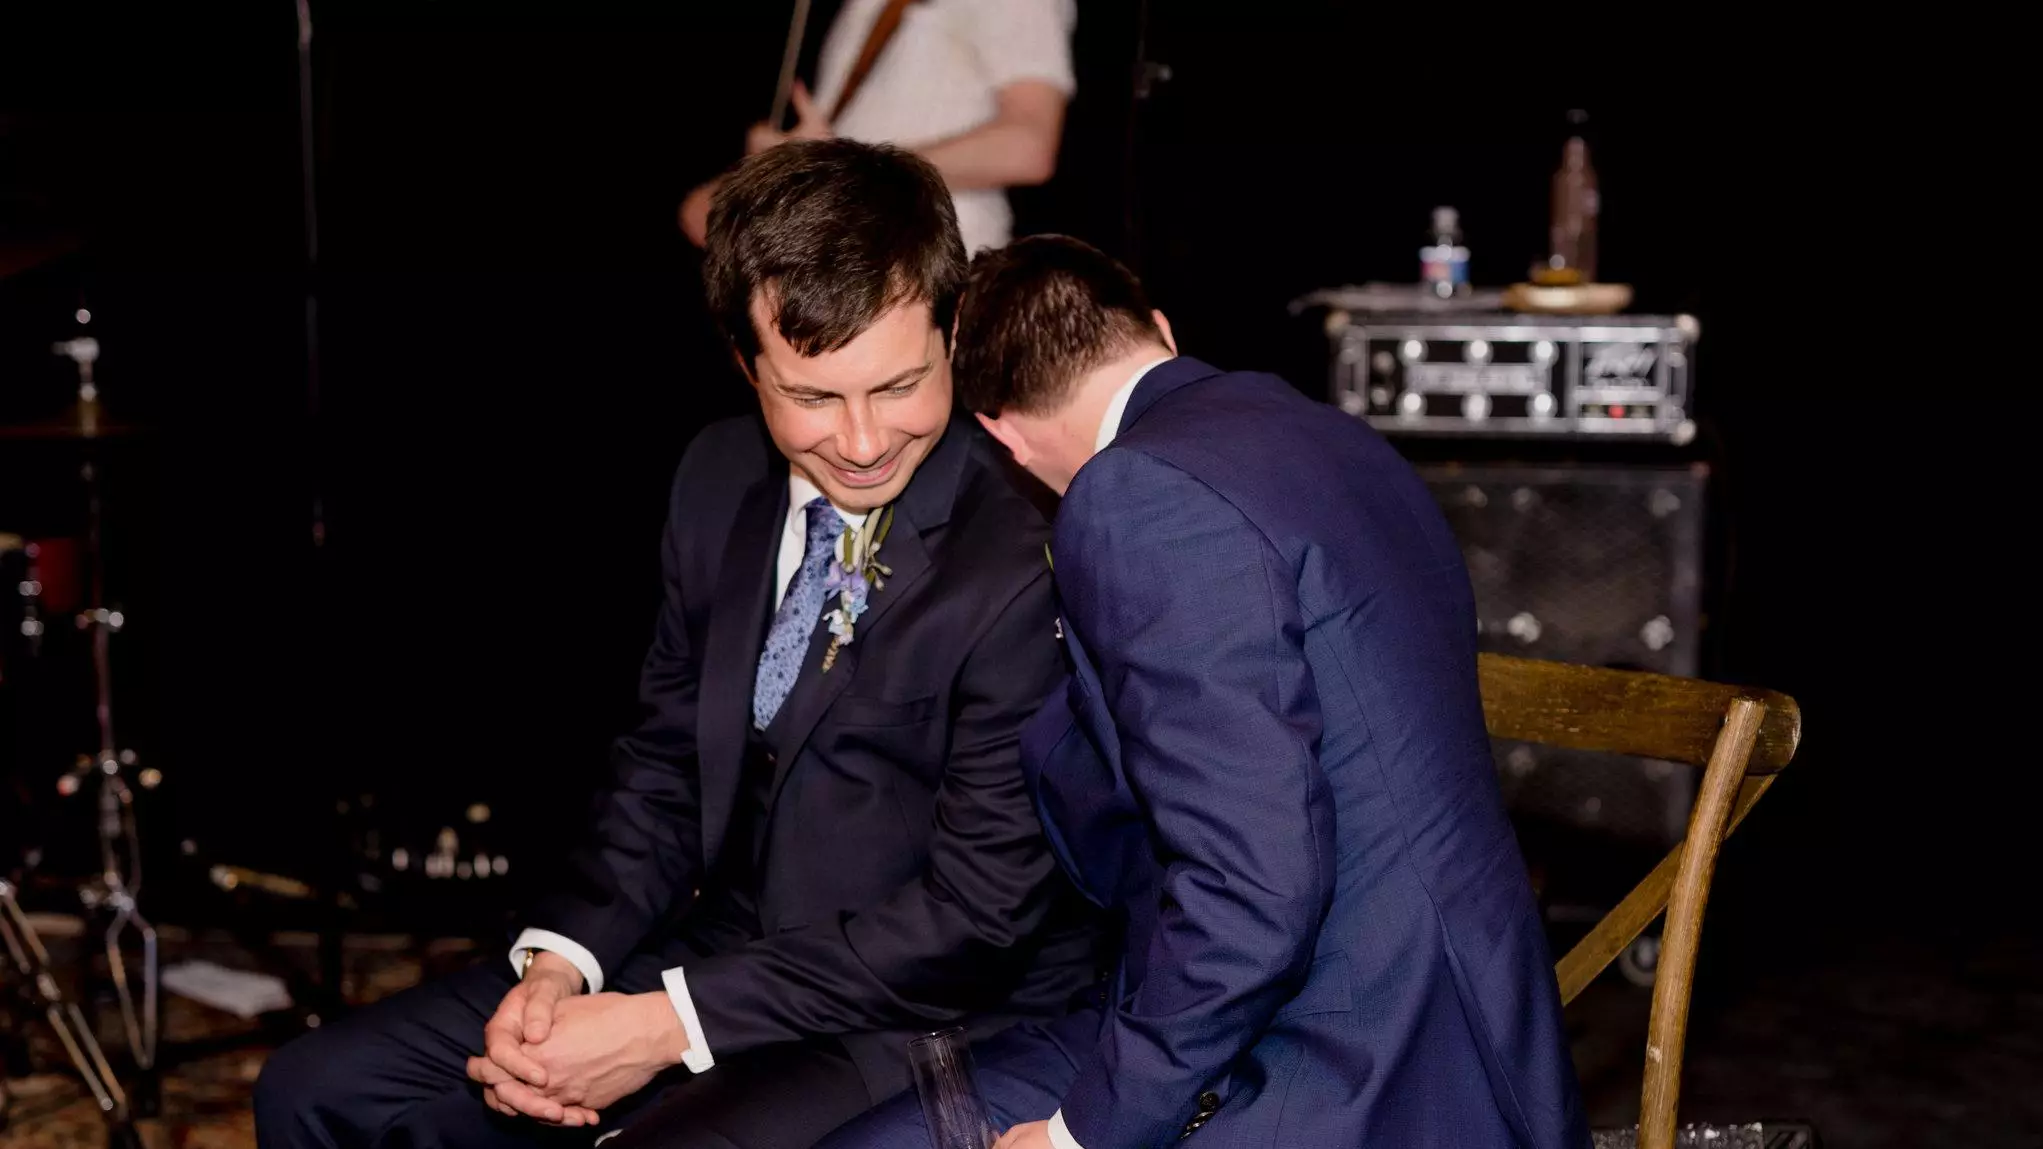 Meet The Mayor Who Celebrated His Gay Wedding By Going To Pride